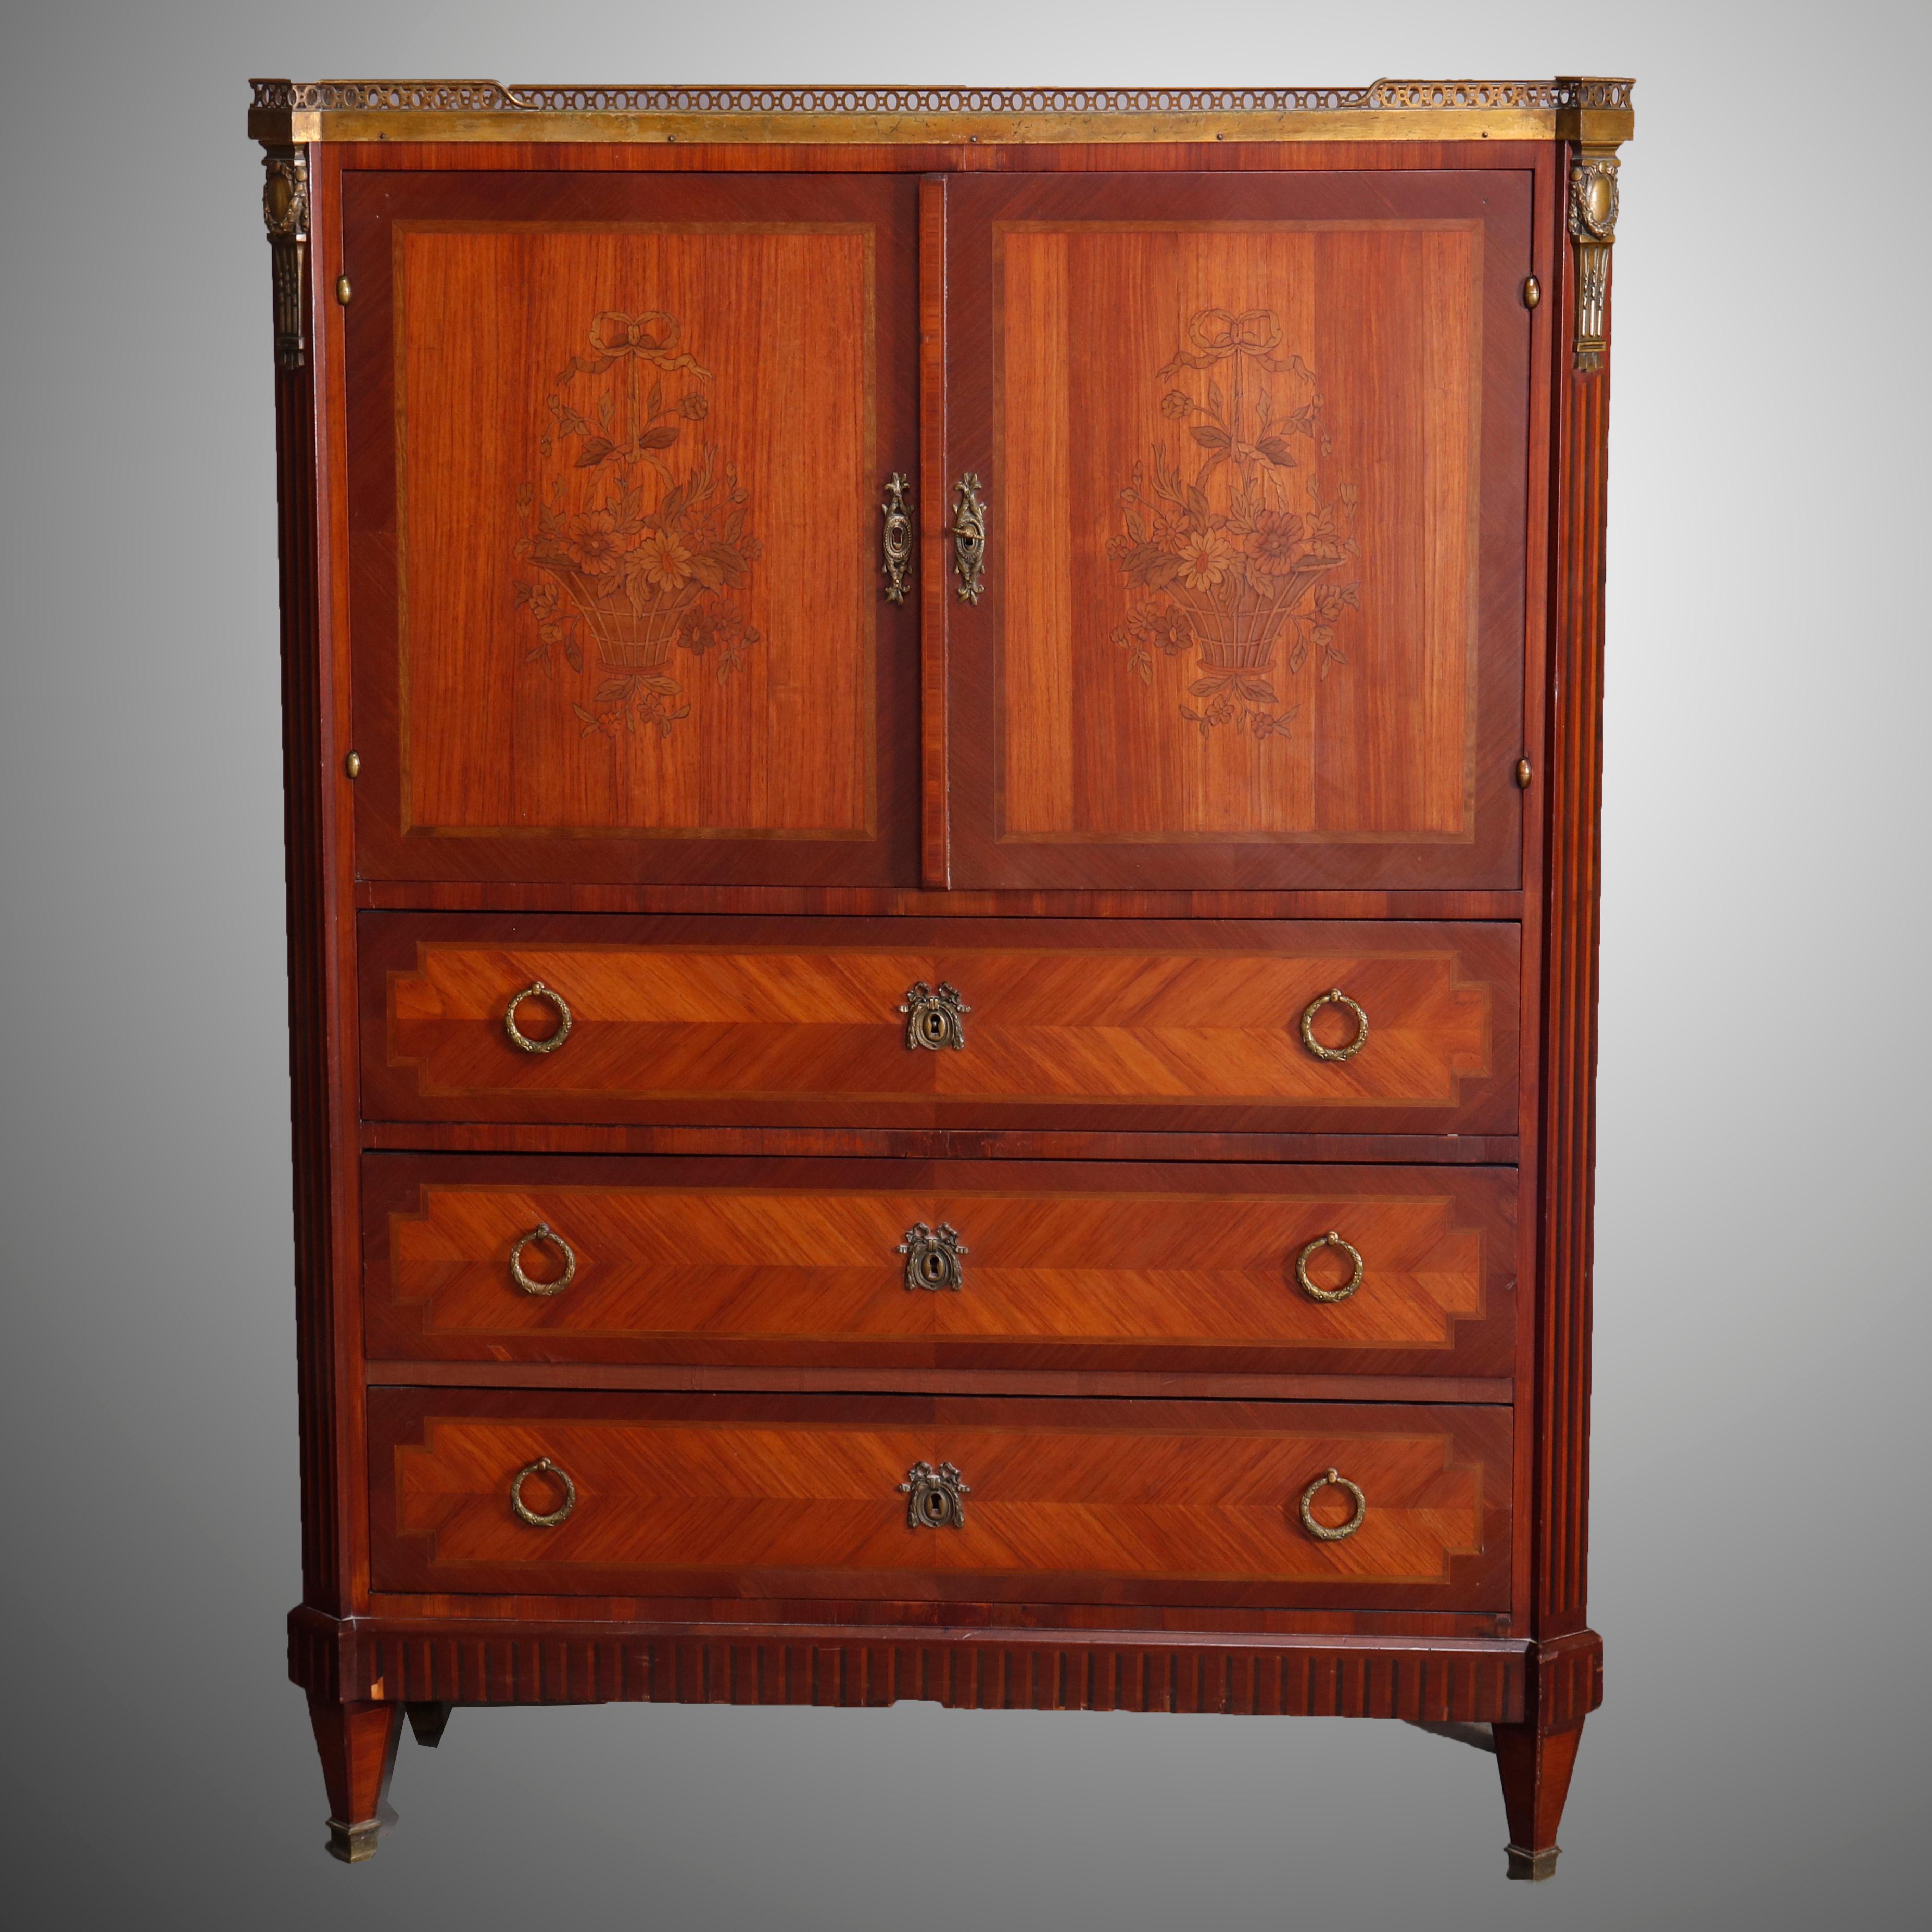 An antique French Louis XVI style tall chest offers mahogany construction with upper having pierced bronze gallery over marble top and with double kingwood inlaid doors each having floral design marquetry and opening to reveal slide out drawers,